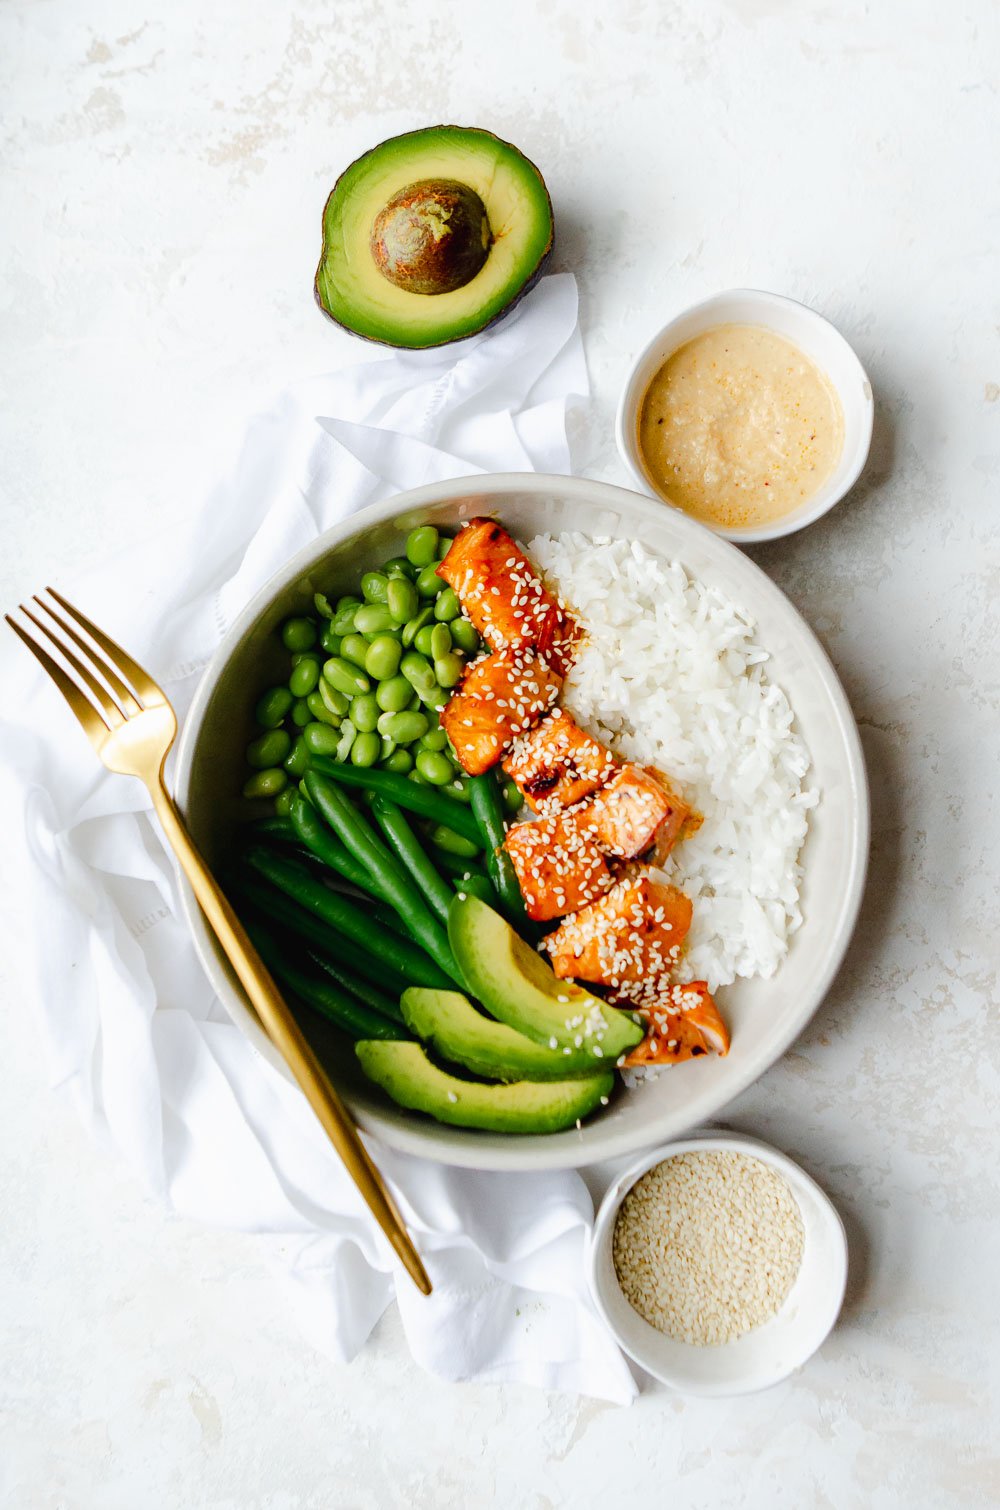 Hot honey salmon bites in a white bowl with white rice, avocado slices, string beans, edamame and is garnished with sesame seeds. Next to bowl are small dishes of sesame seeds, chili sauce and half an avocado.